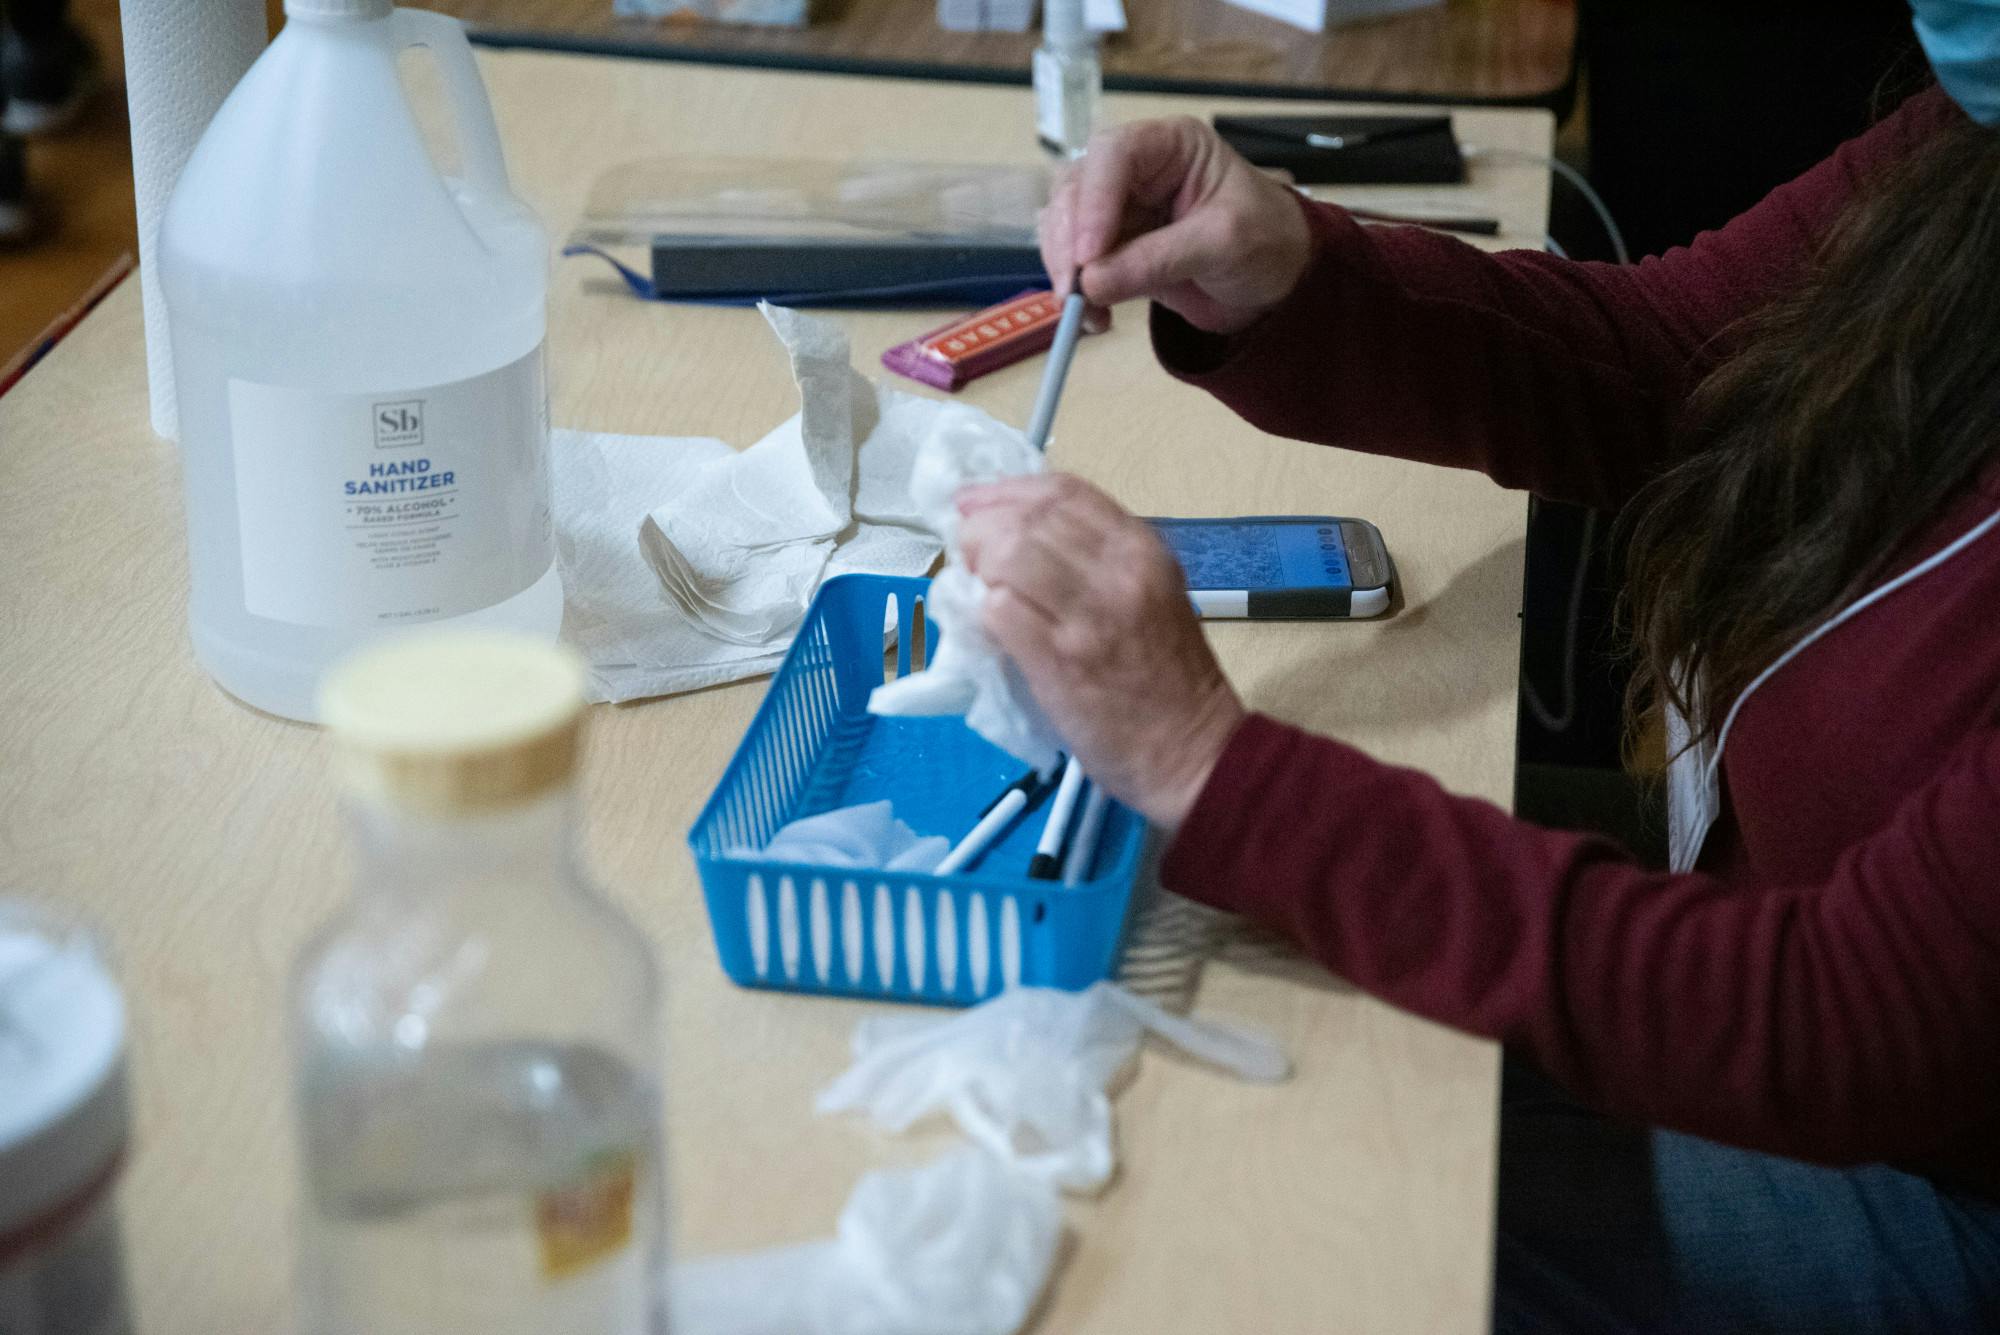 A person sanitizes pens at a polling location.